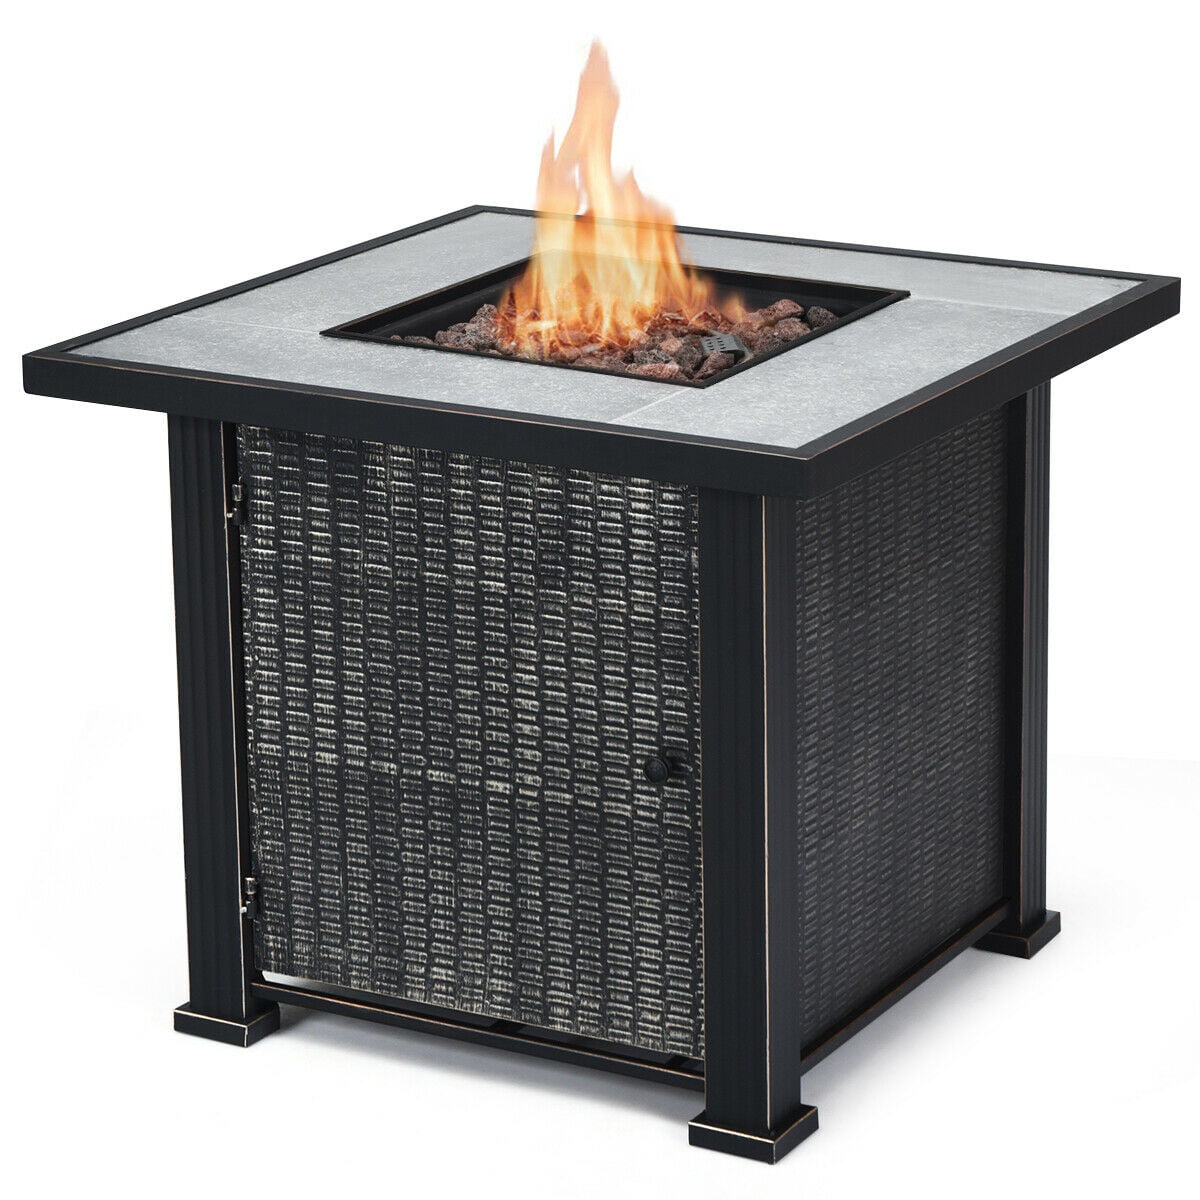 Costway 30 Square Propane Gas Fire Pit, Propane Fire Pit Table Vs Patio Heater